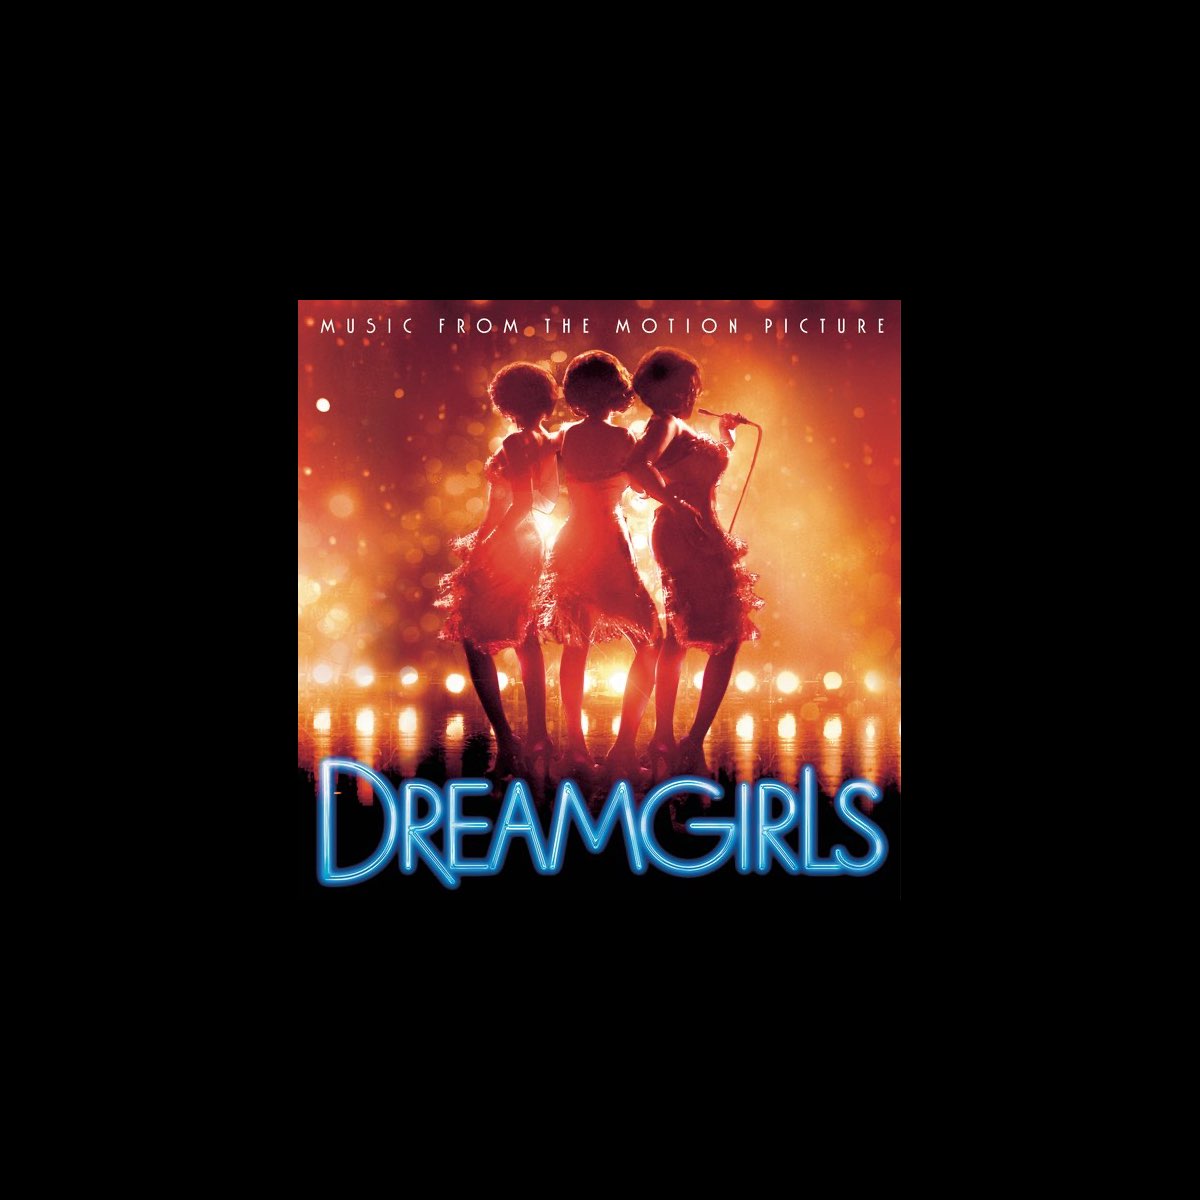 Various Artistsの Dreamgirls Music From The Motion Picture をapple Musicで